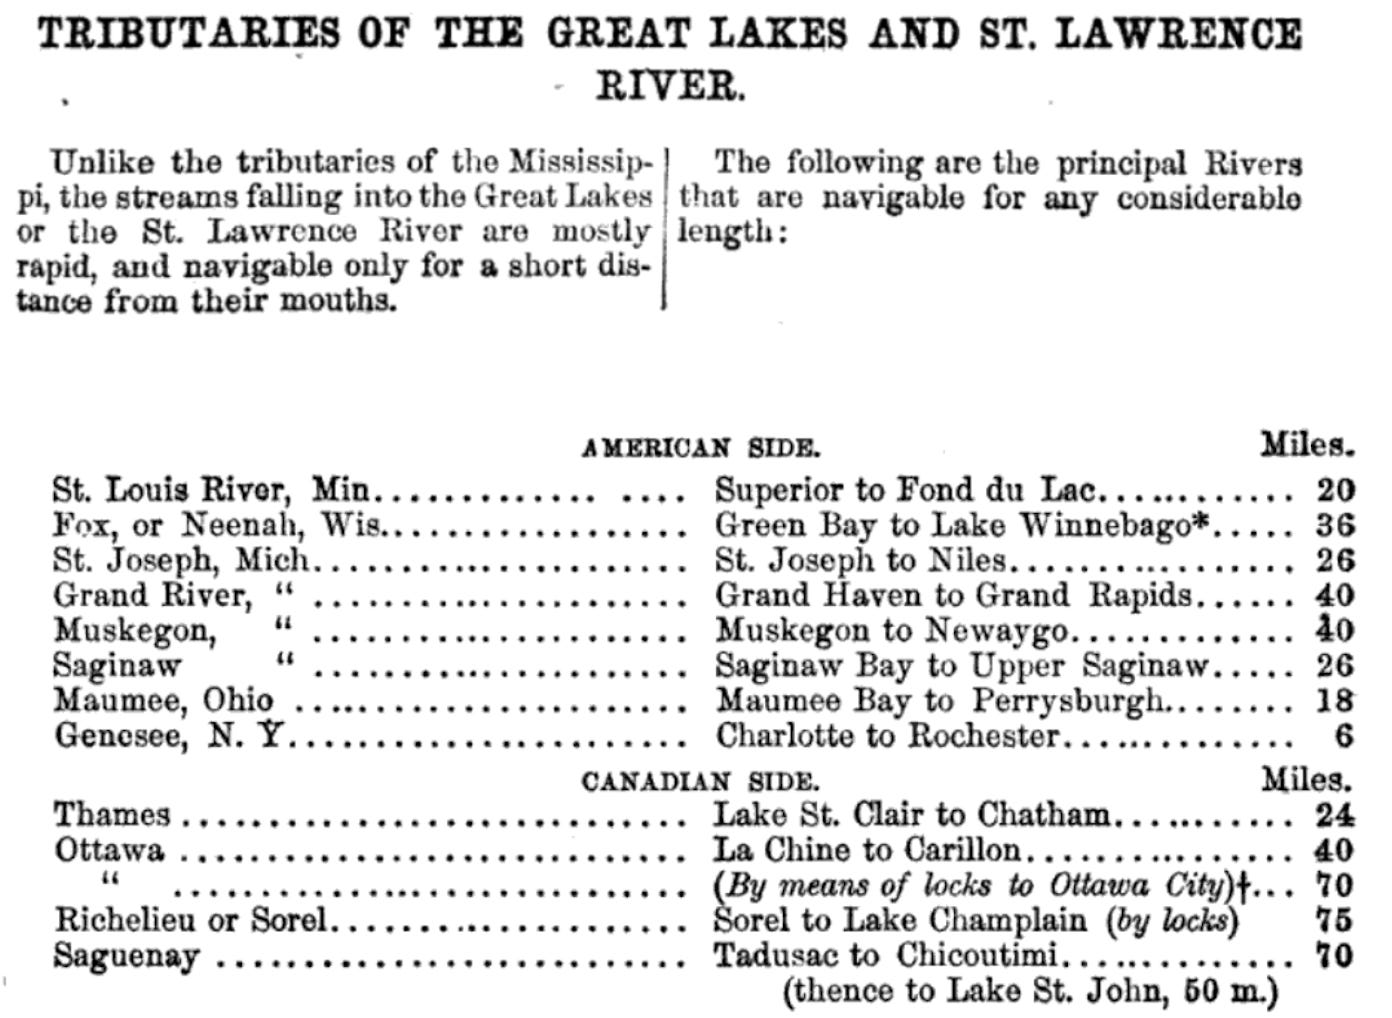 Page from an old book listing tributaries of the Great Lakes and St. Lawrence River